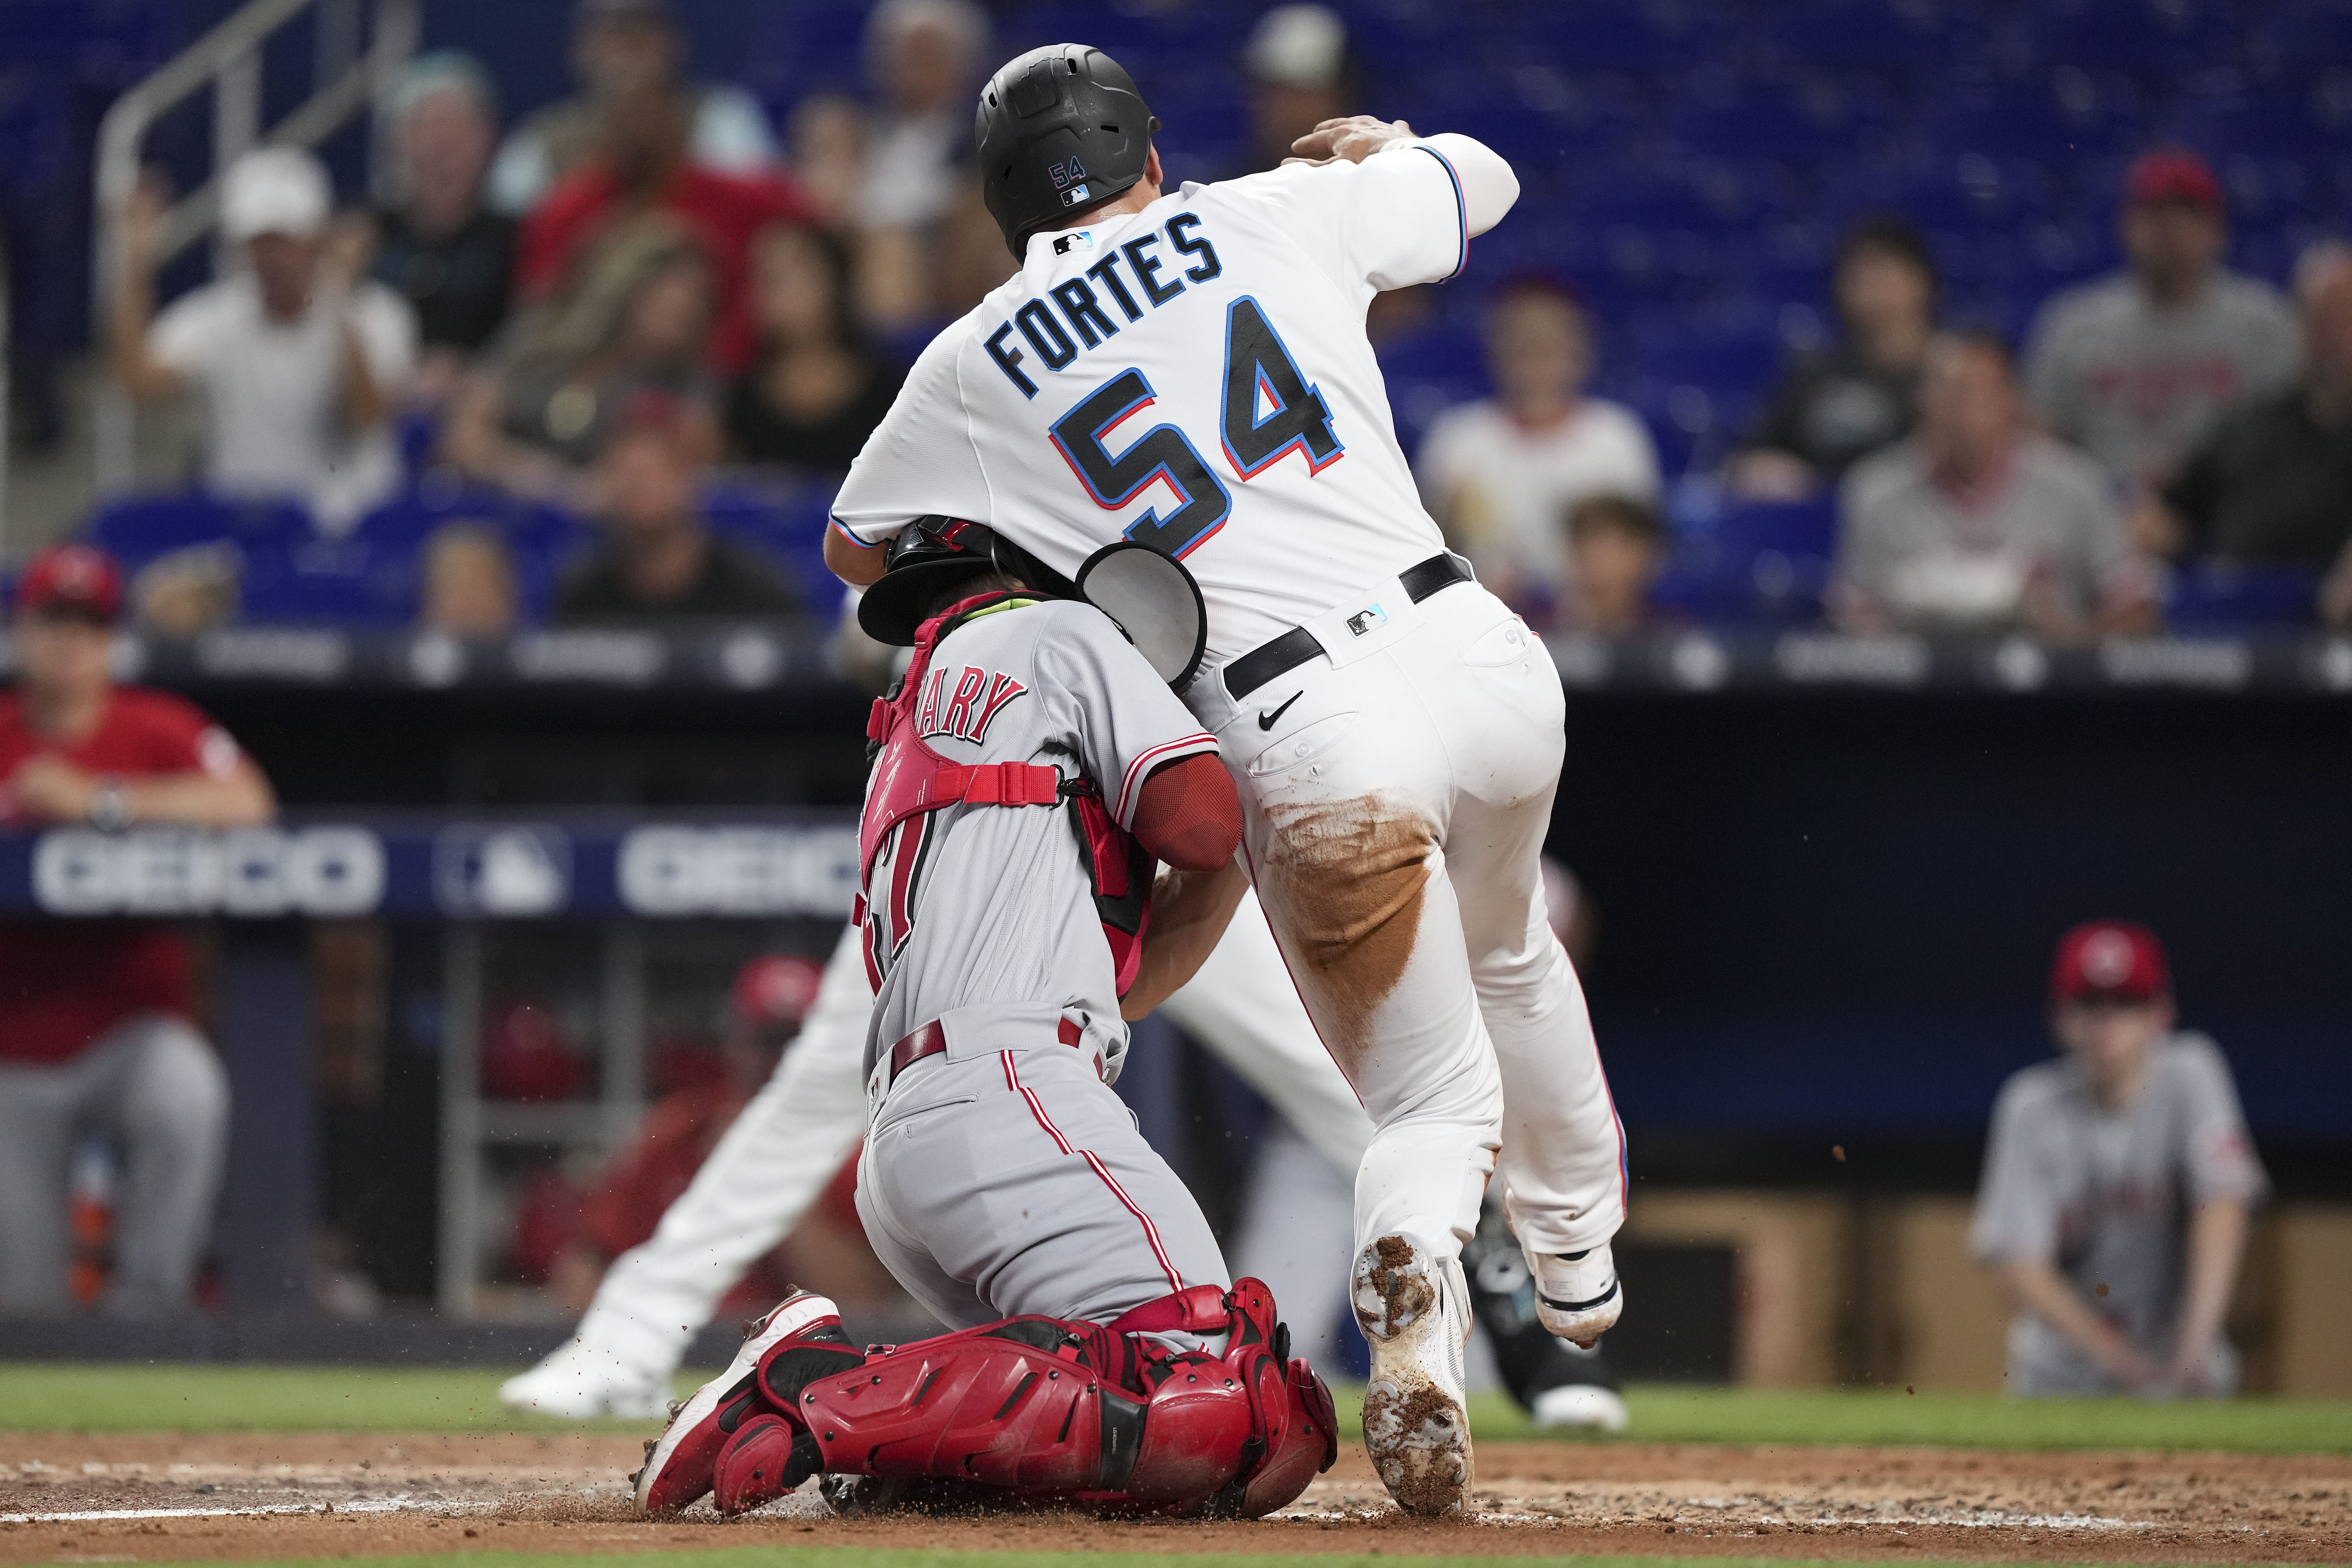 Alcantara blazes to his best start in months, topping Rays and ending  Marlins' 10-game road losing skid